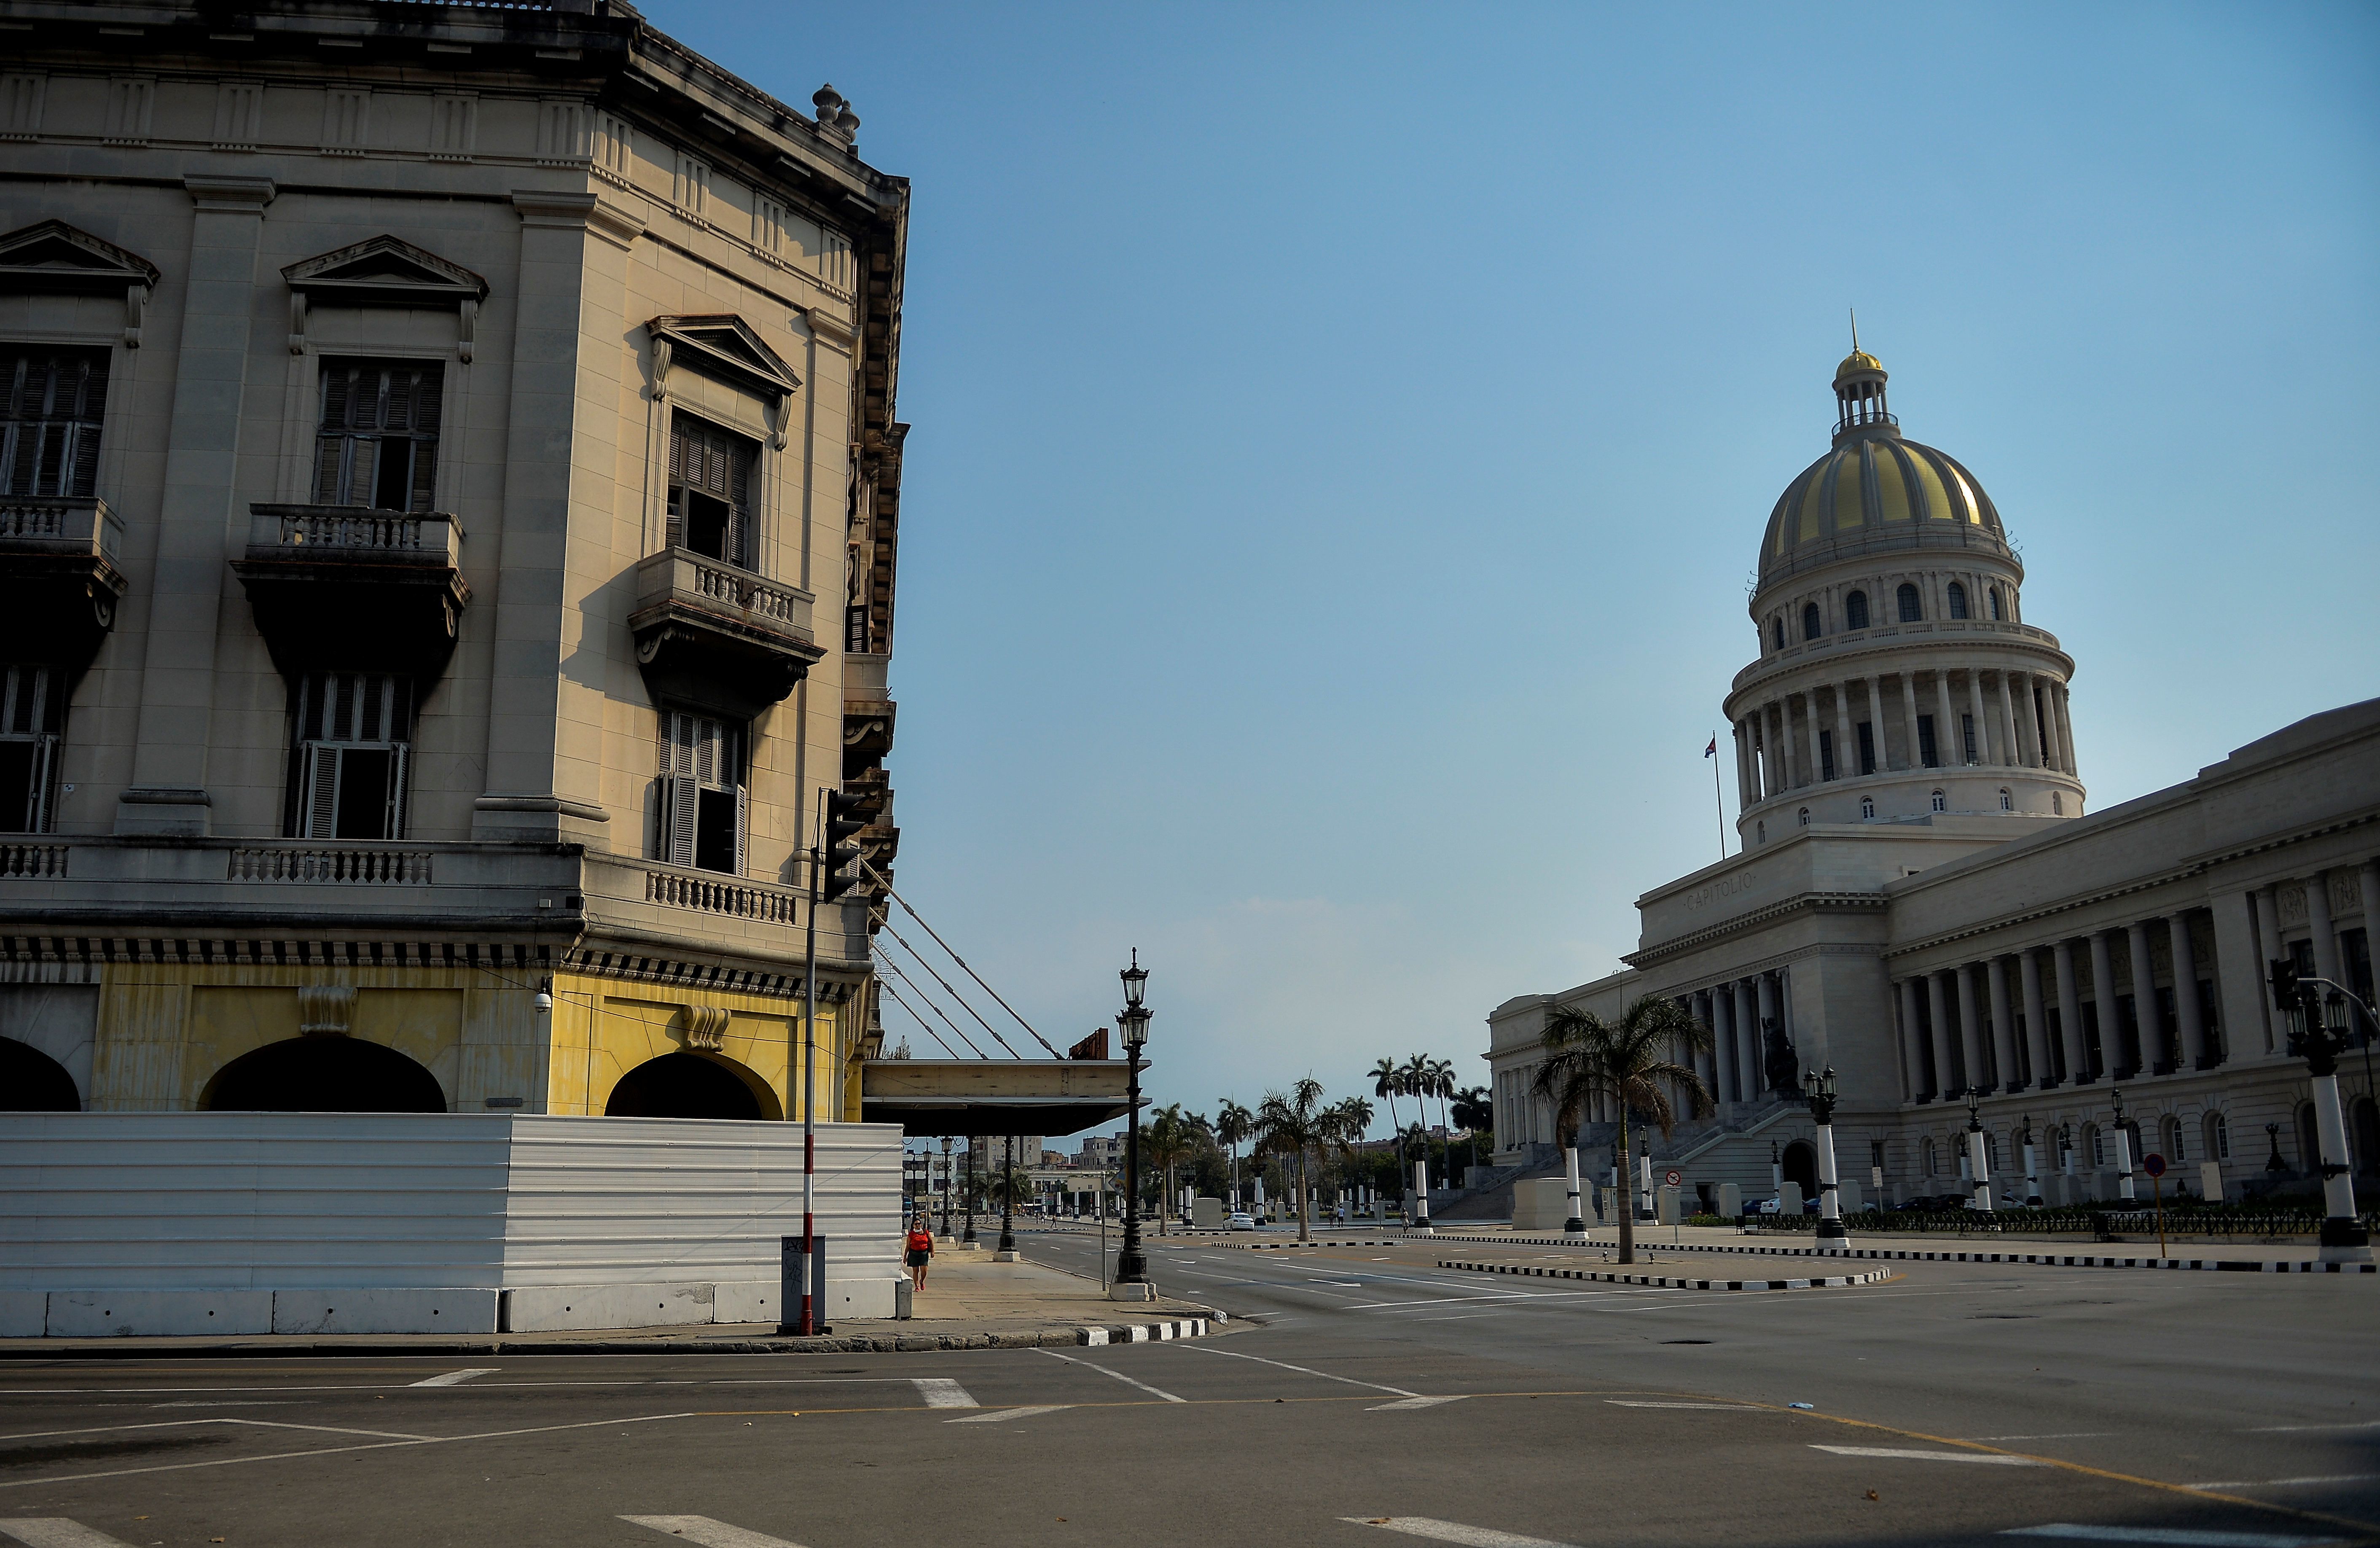 An empty street near the Havana Capitol, in Cuba in May 2020. The Trump administration plans to designate Cuba as a state sponsor of terrorism. CREDIT: Yamil Lage/AFP viaCGetty Images